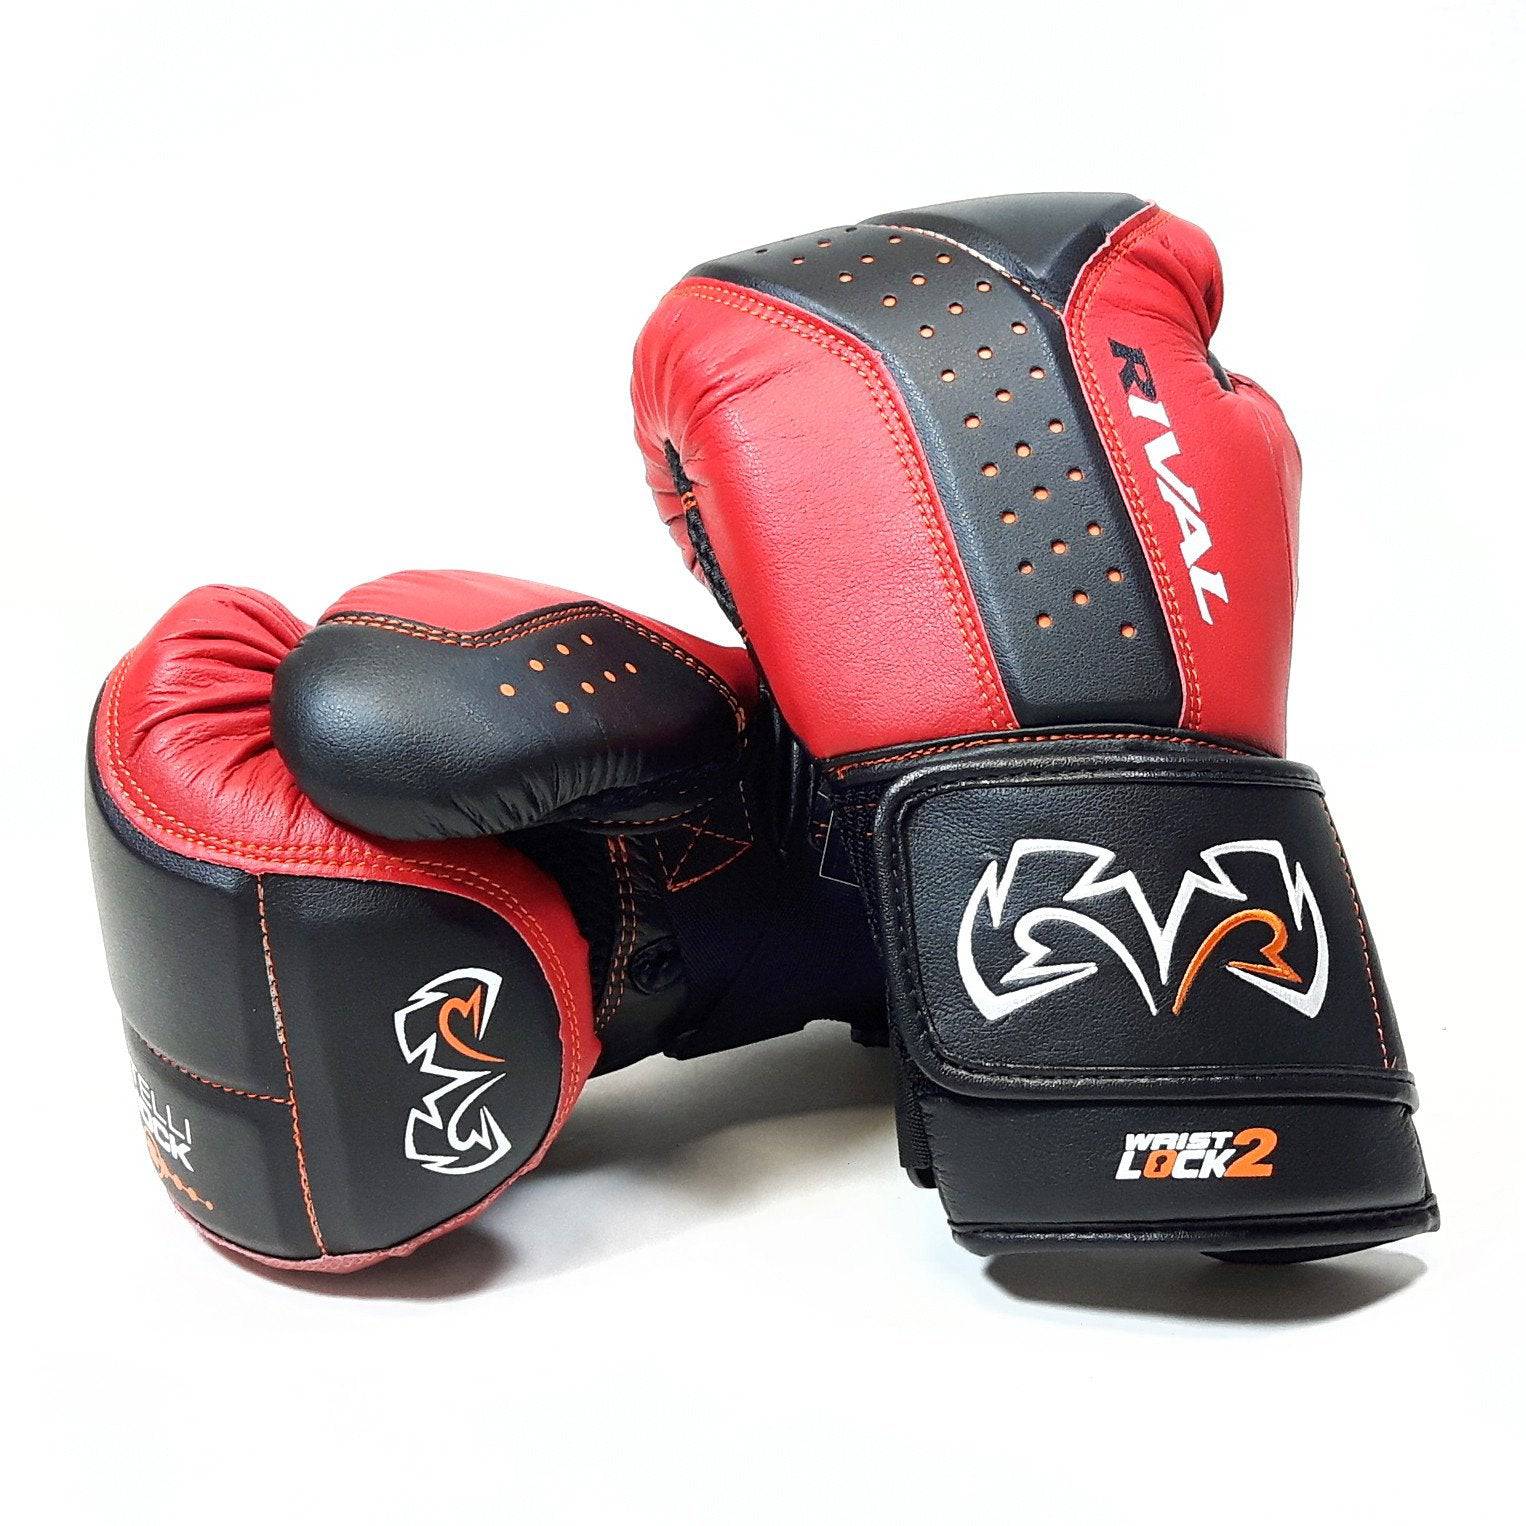 Rival | Bag Gloves - RB10-Intelli-Shock - XTC Fitness - Exercise Equipment Superstore - Canada - Bag Gloves